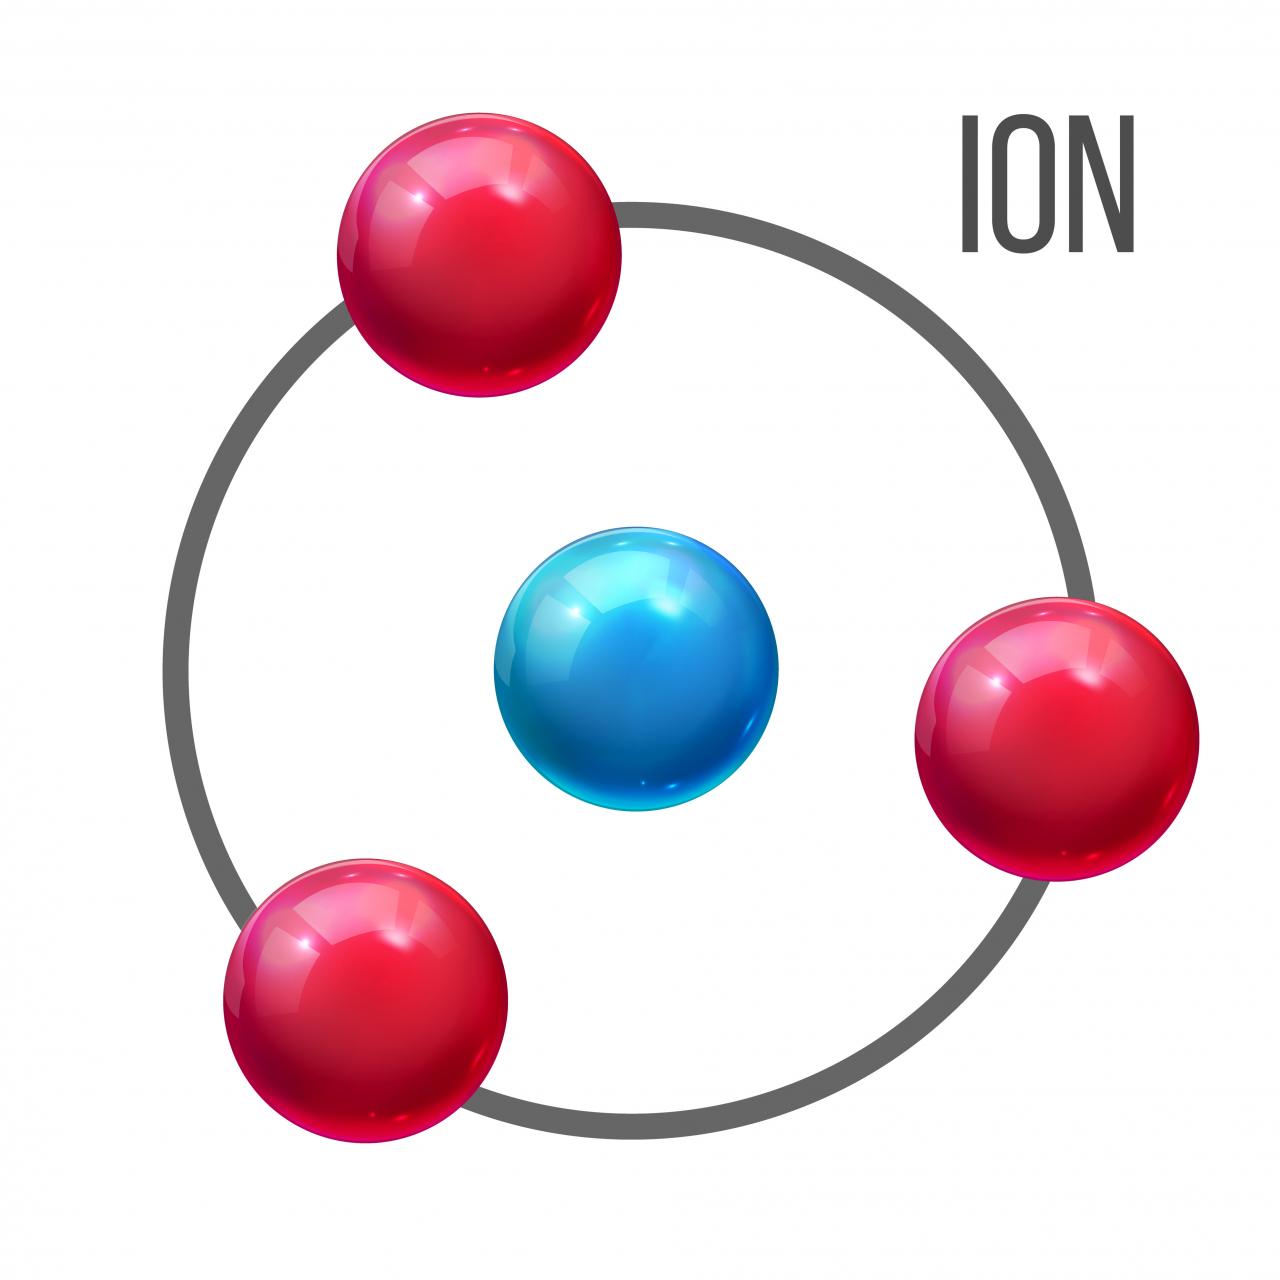 An atom with a net electric charge